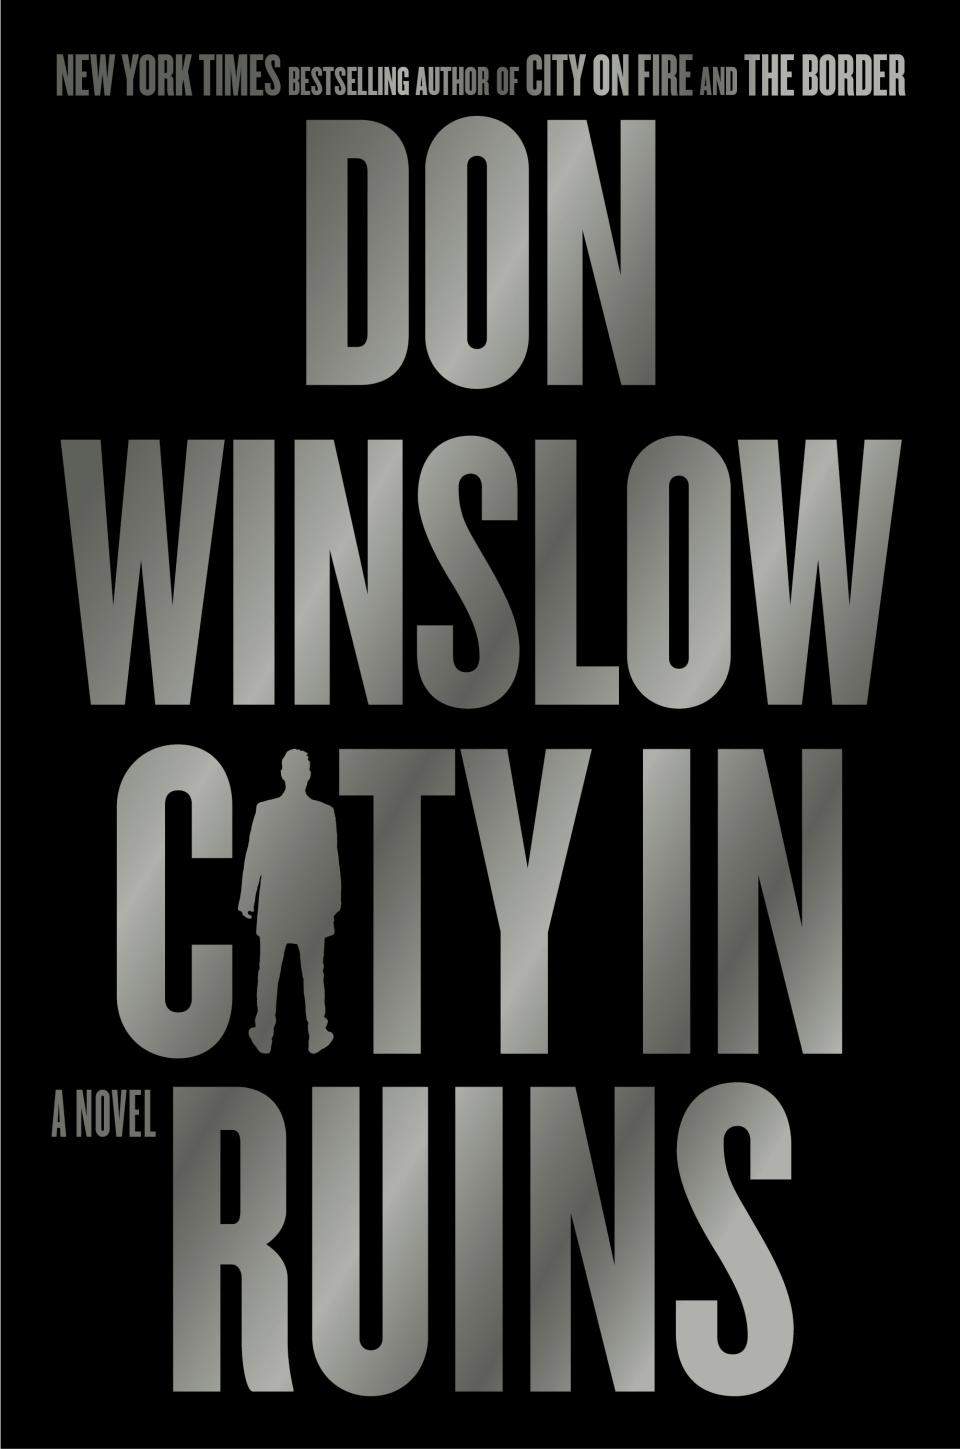 This image released by William Morrow shows "City in Ruins" by Don Winslow. (William Morrow via AP)